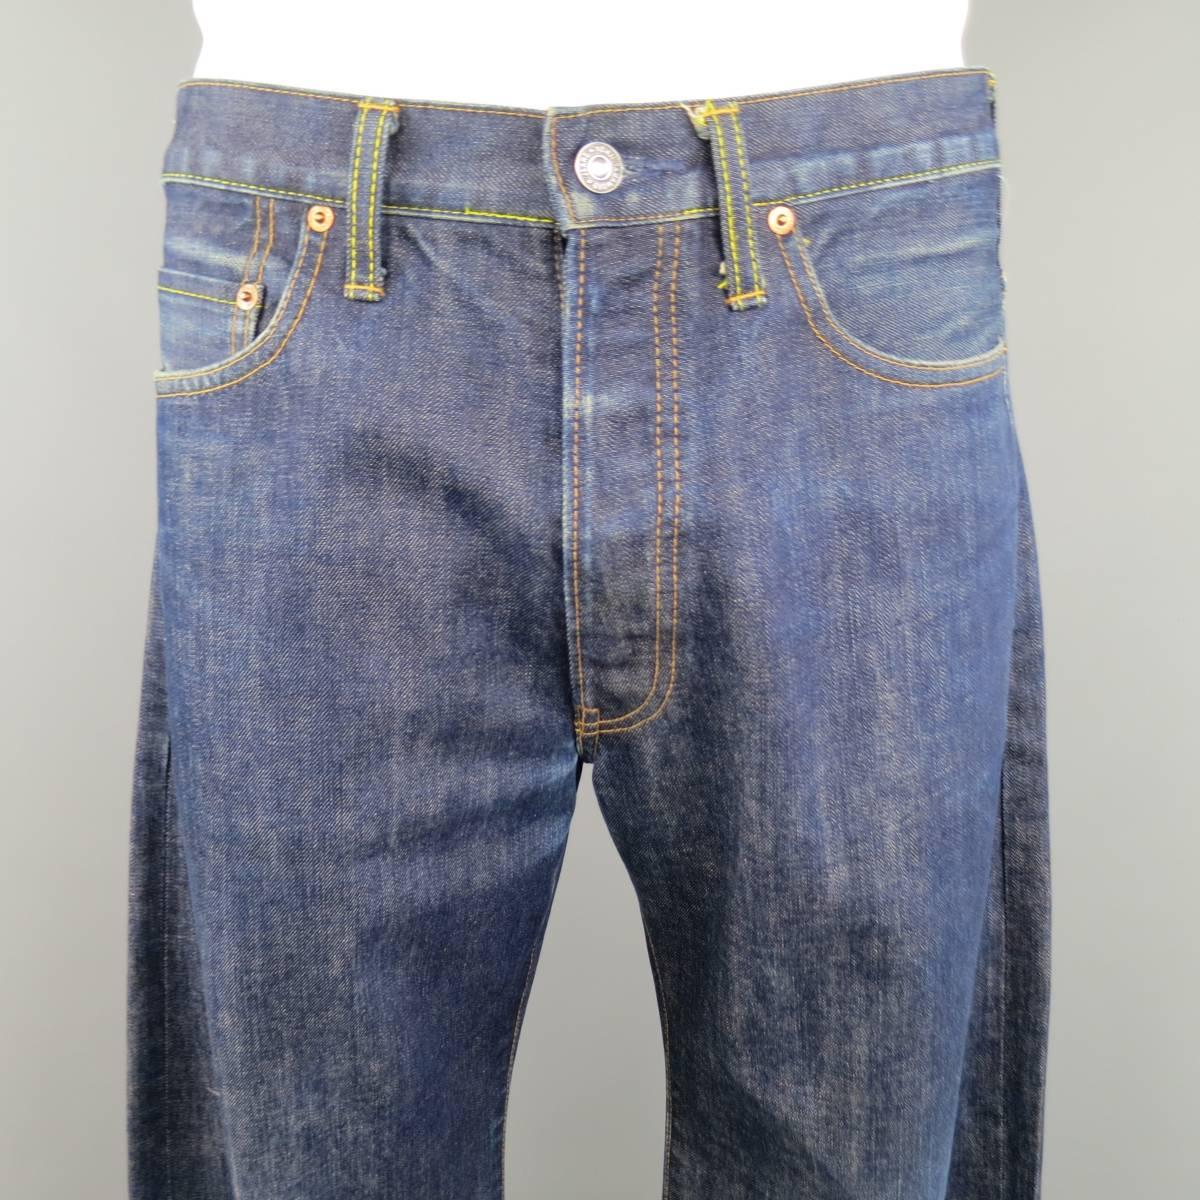 Vintage YOHJI YAMAMOTO jean come in an indigo navy blue selvedge denim and feature a button fly, wide leg, and tan patent back patch. Wear throughout. As-Is. Made in Japan.
 
Good Pre-Owned Condition.
Marked: 34
 
Measurements:
 
Waist: 34 in.
Rise: